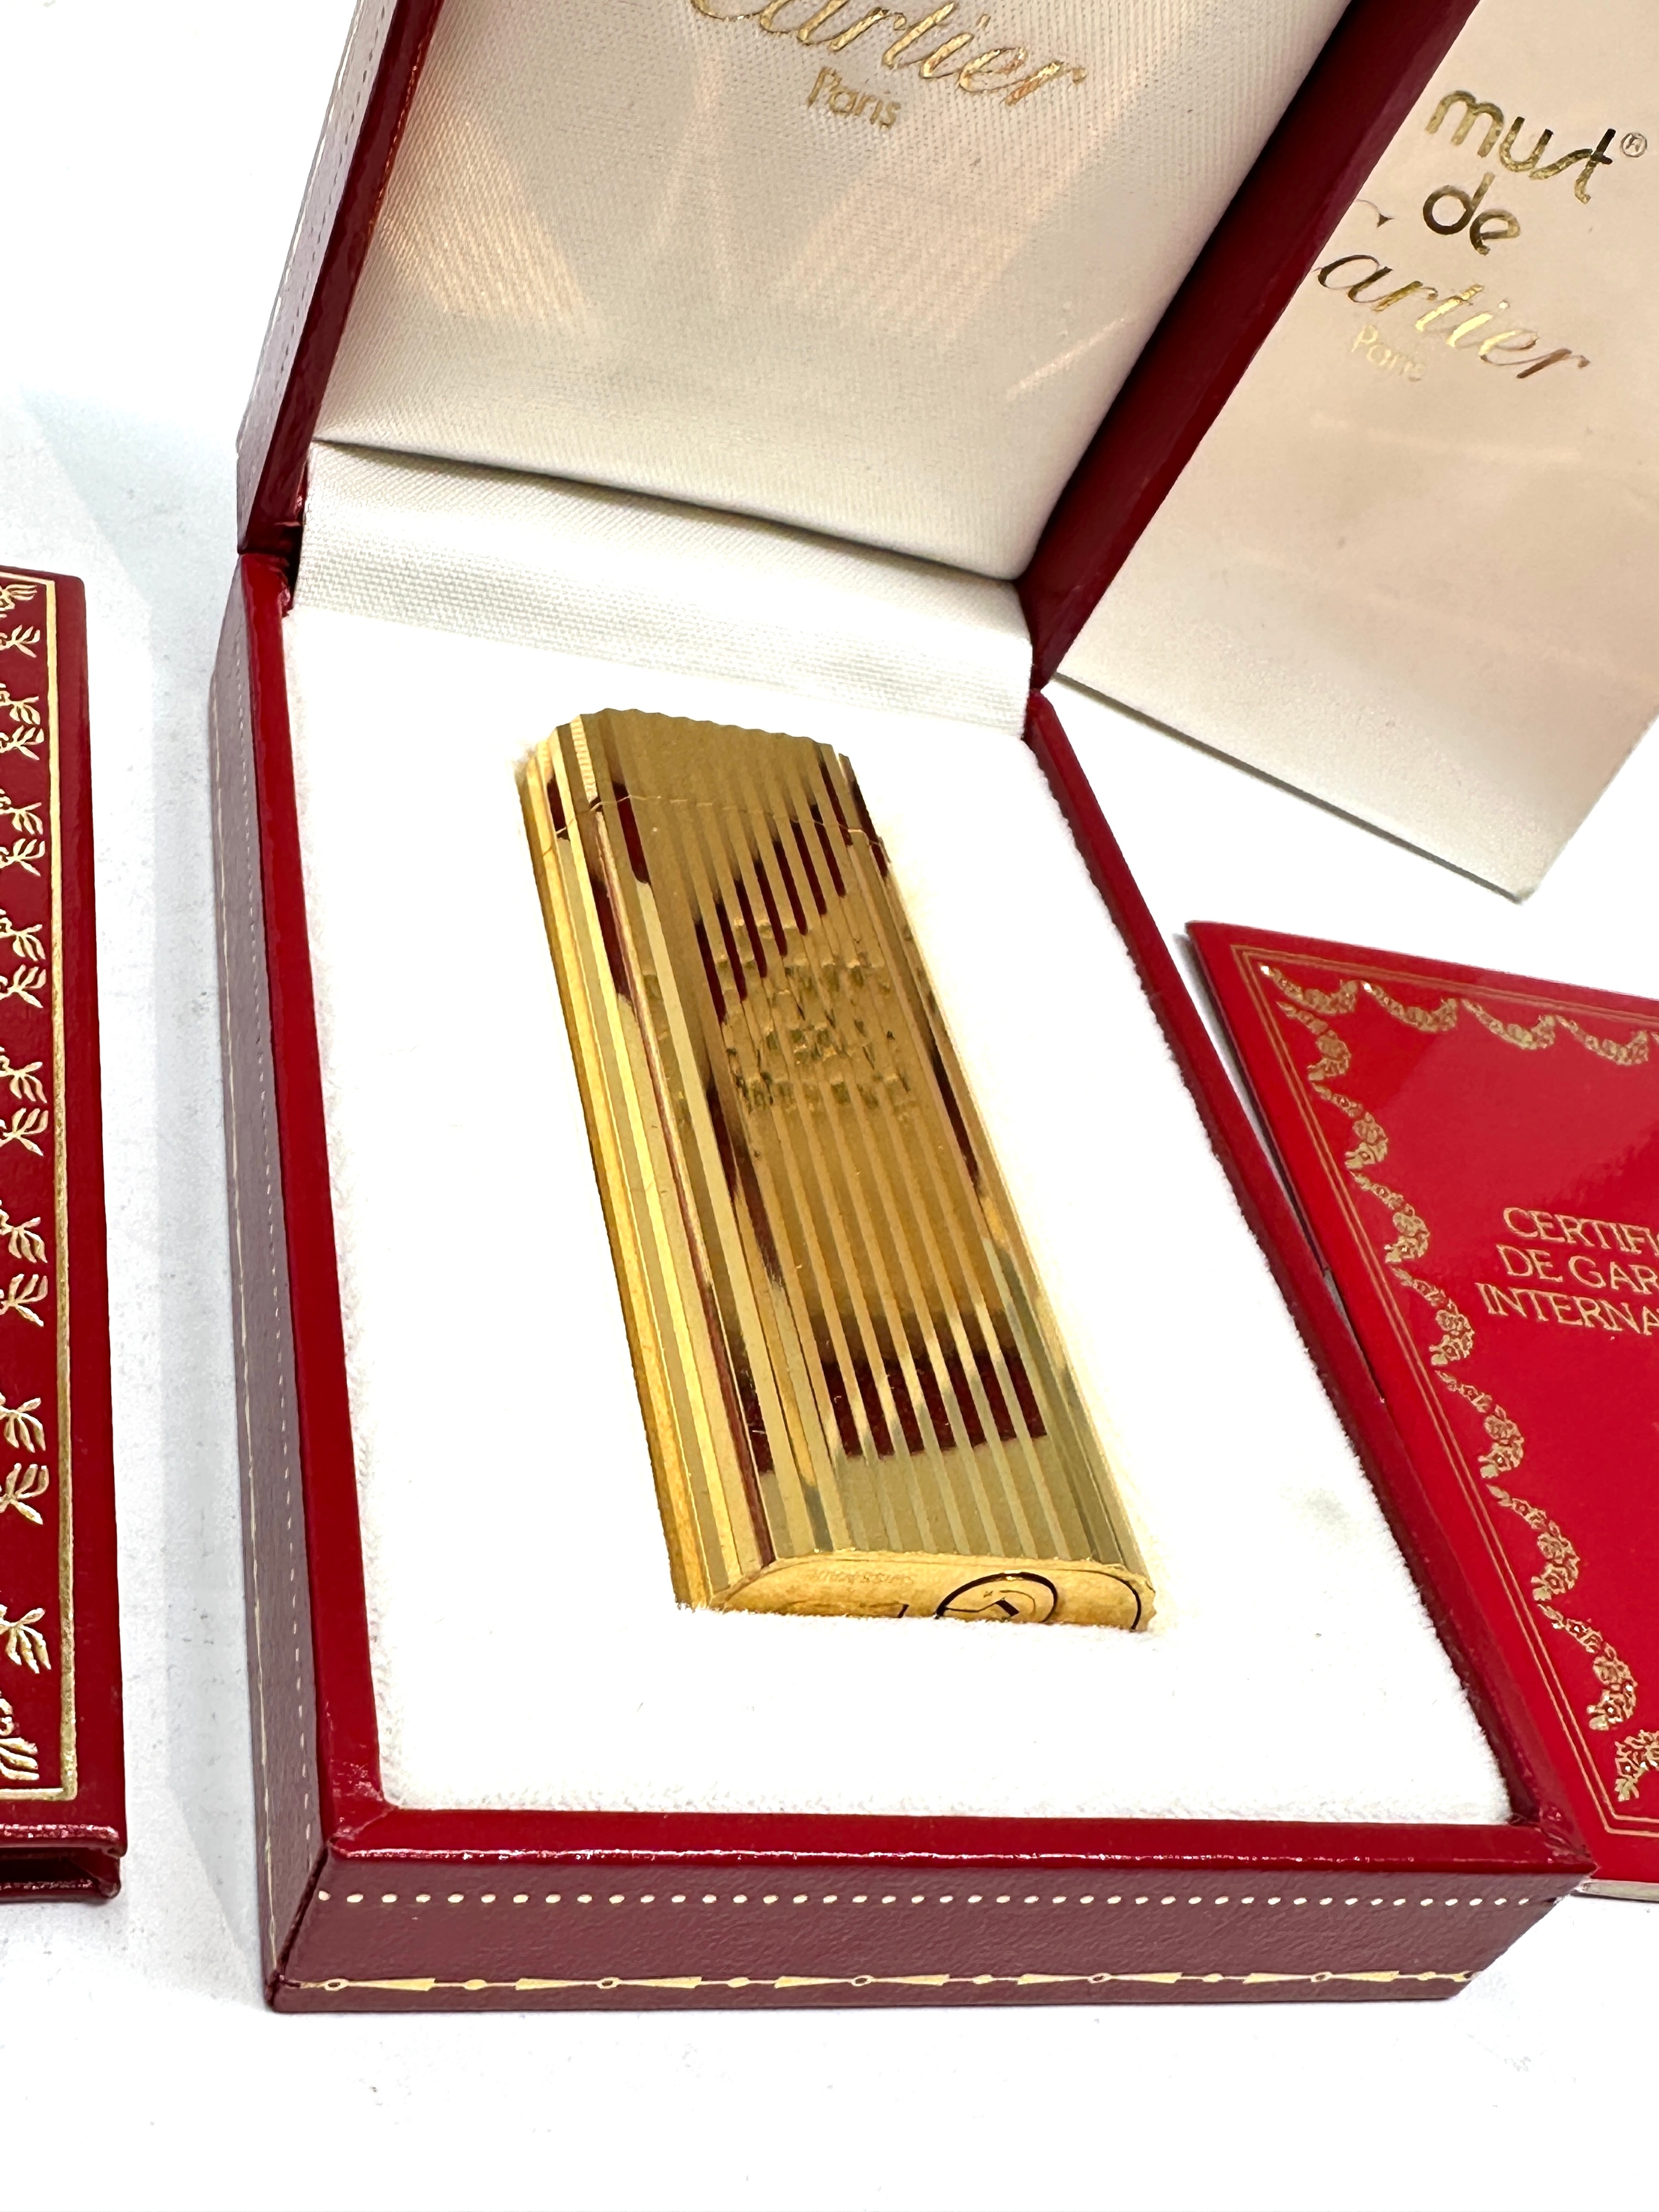 Original boxed Cartier cigarette lighter in as new condition complete with boxes and booklet - Bild 2 aus 4